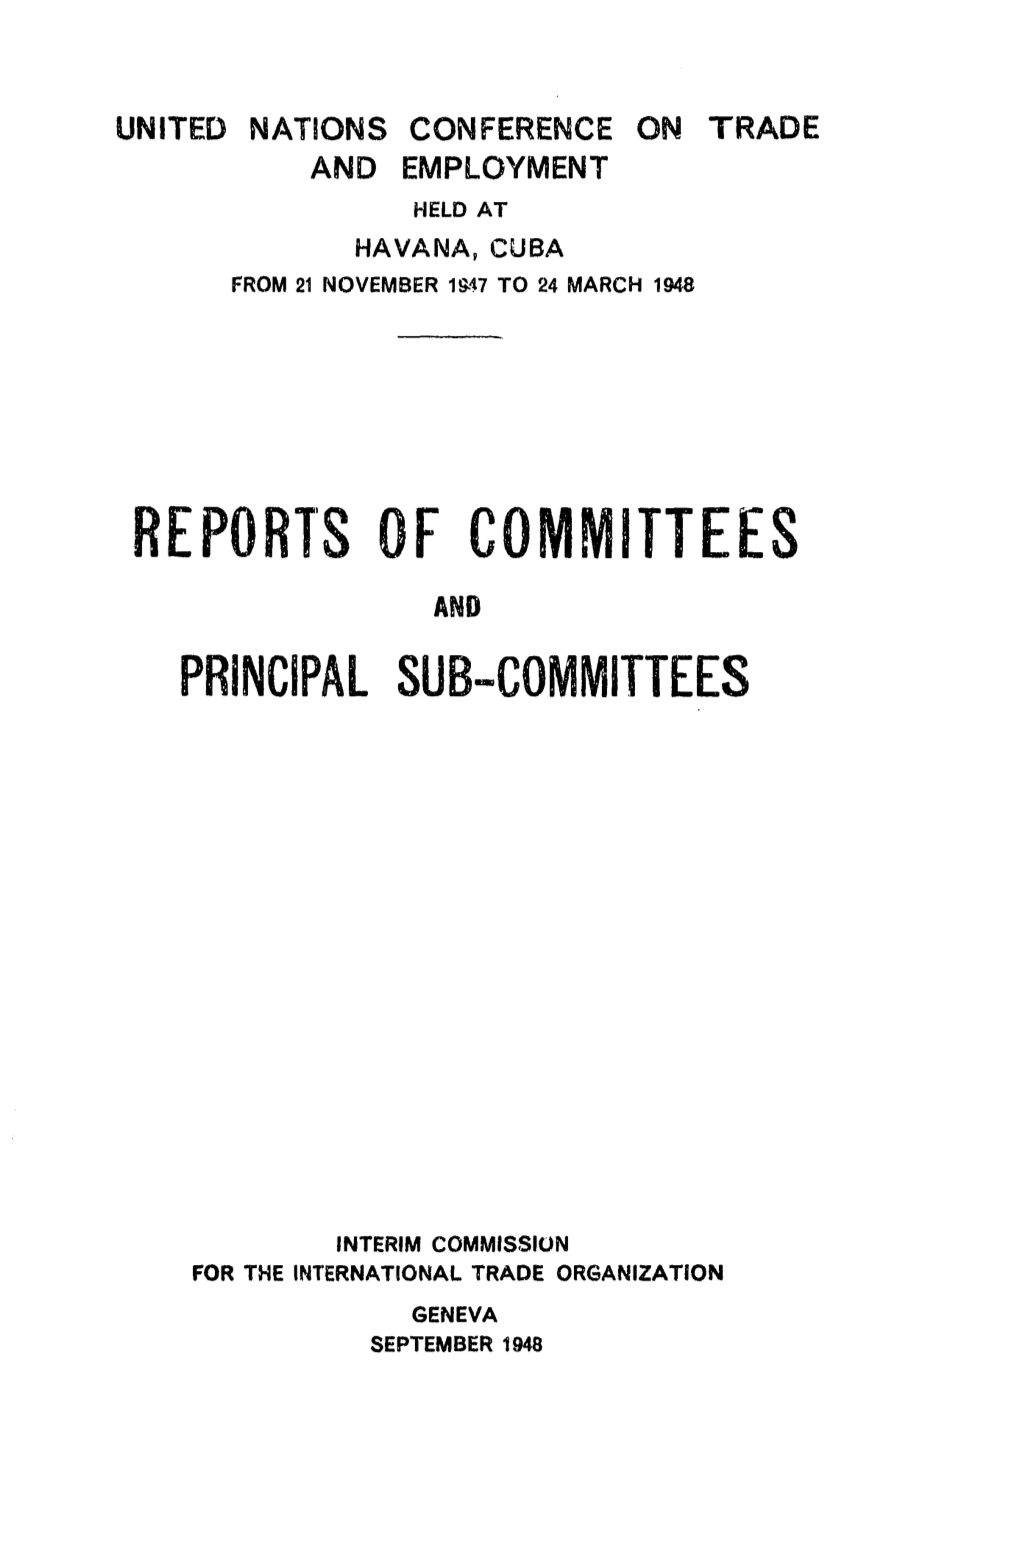 Reports of Committees and Principal Sub-Committees